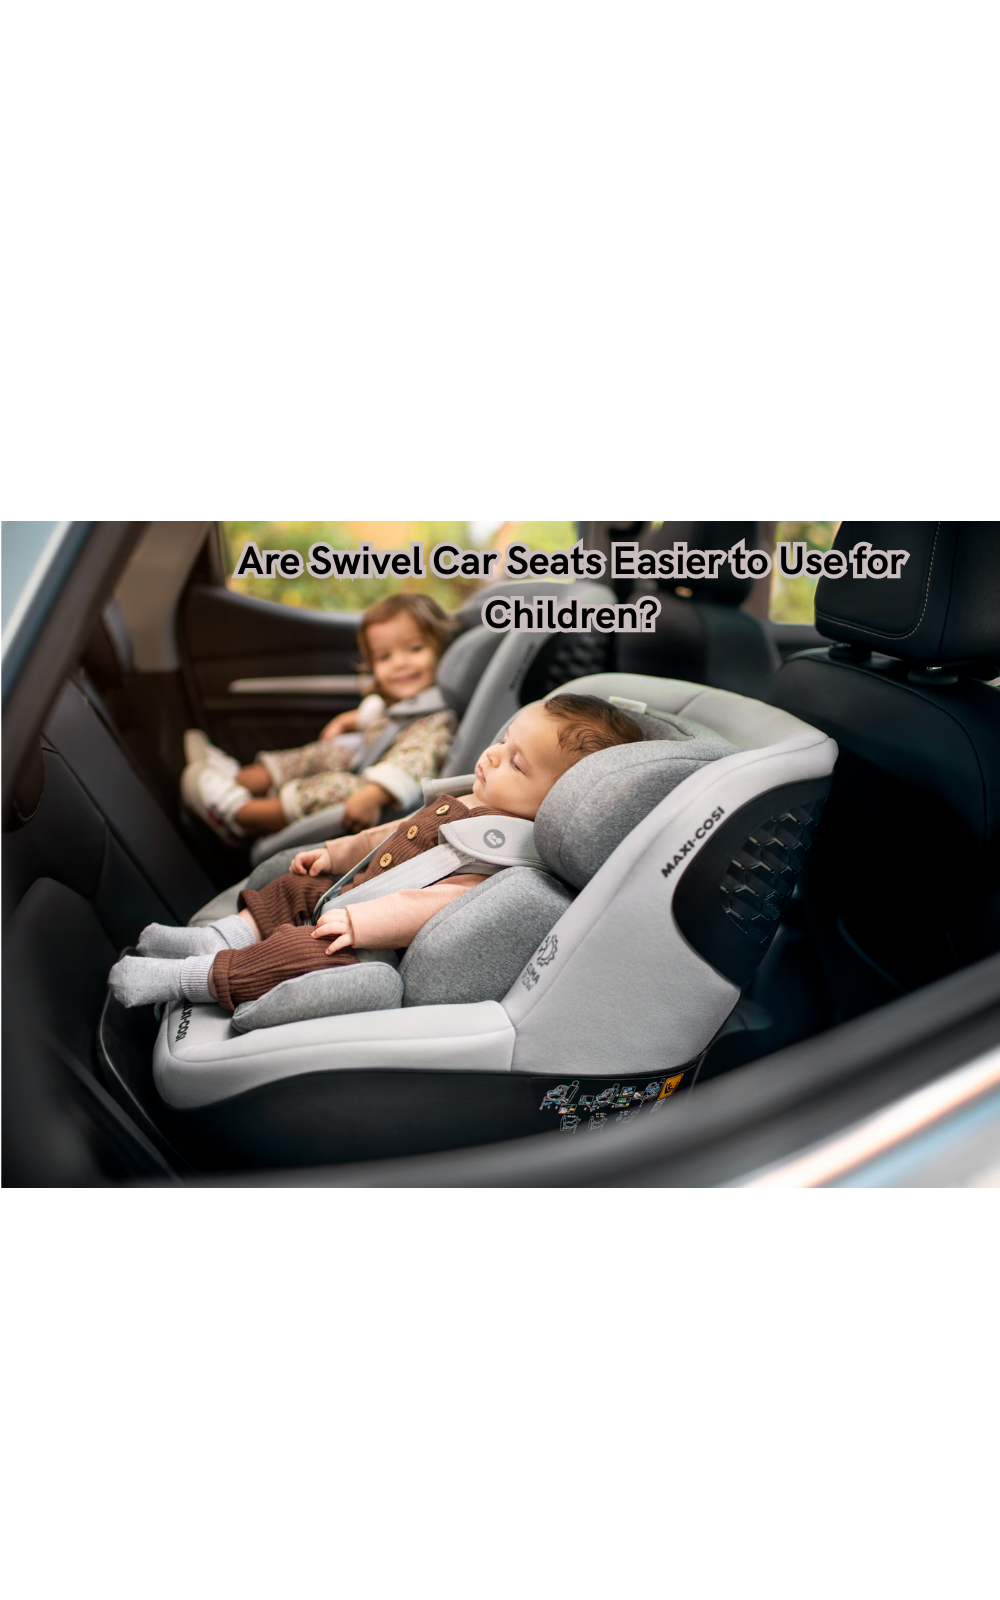 Are Swivel Car Seats Easier to Use for Children? What Parents Need to Know